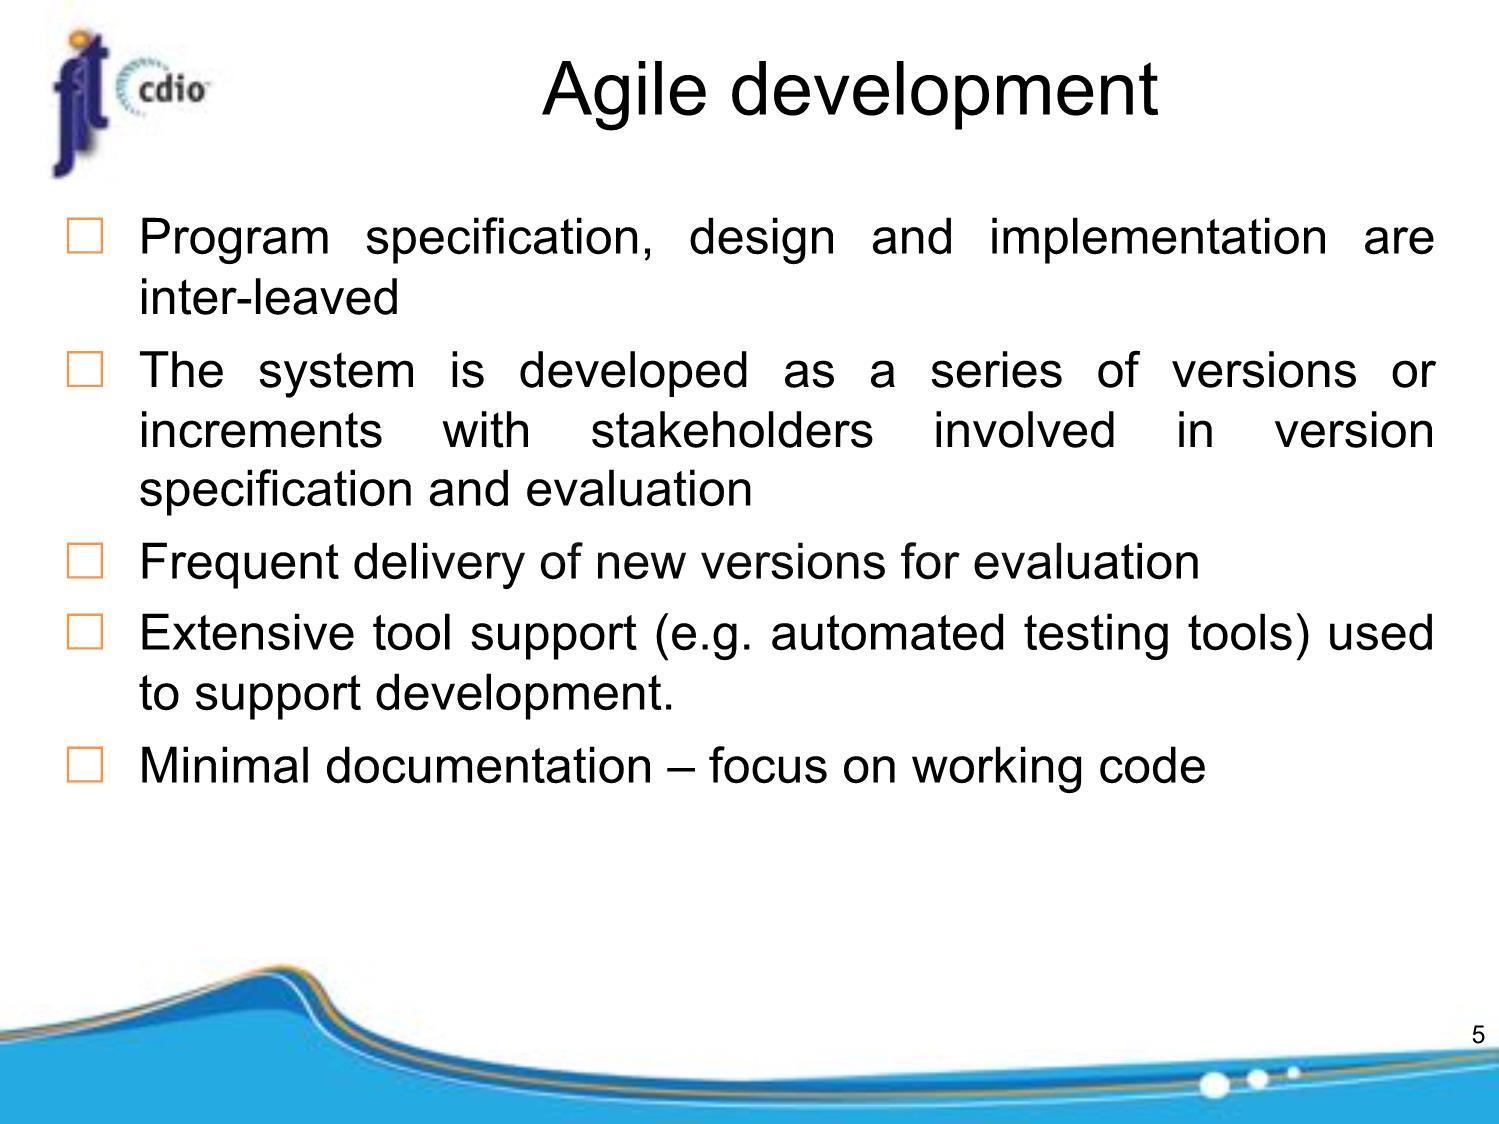 Bài giảng Introduction to Software Engineering - Week 10: Agile software development - Nguyễn Thị Minh Tuyền trang 5